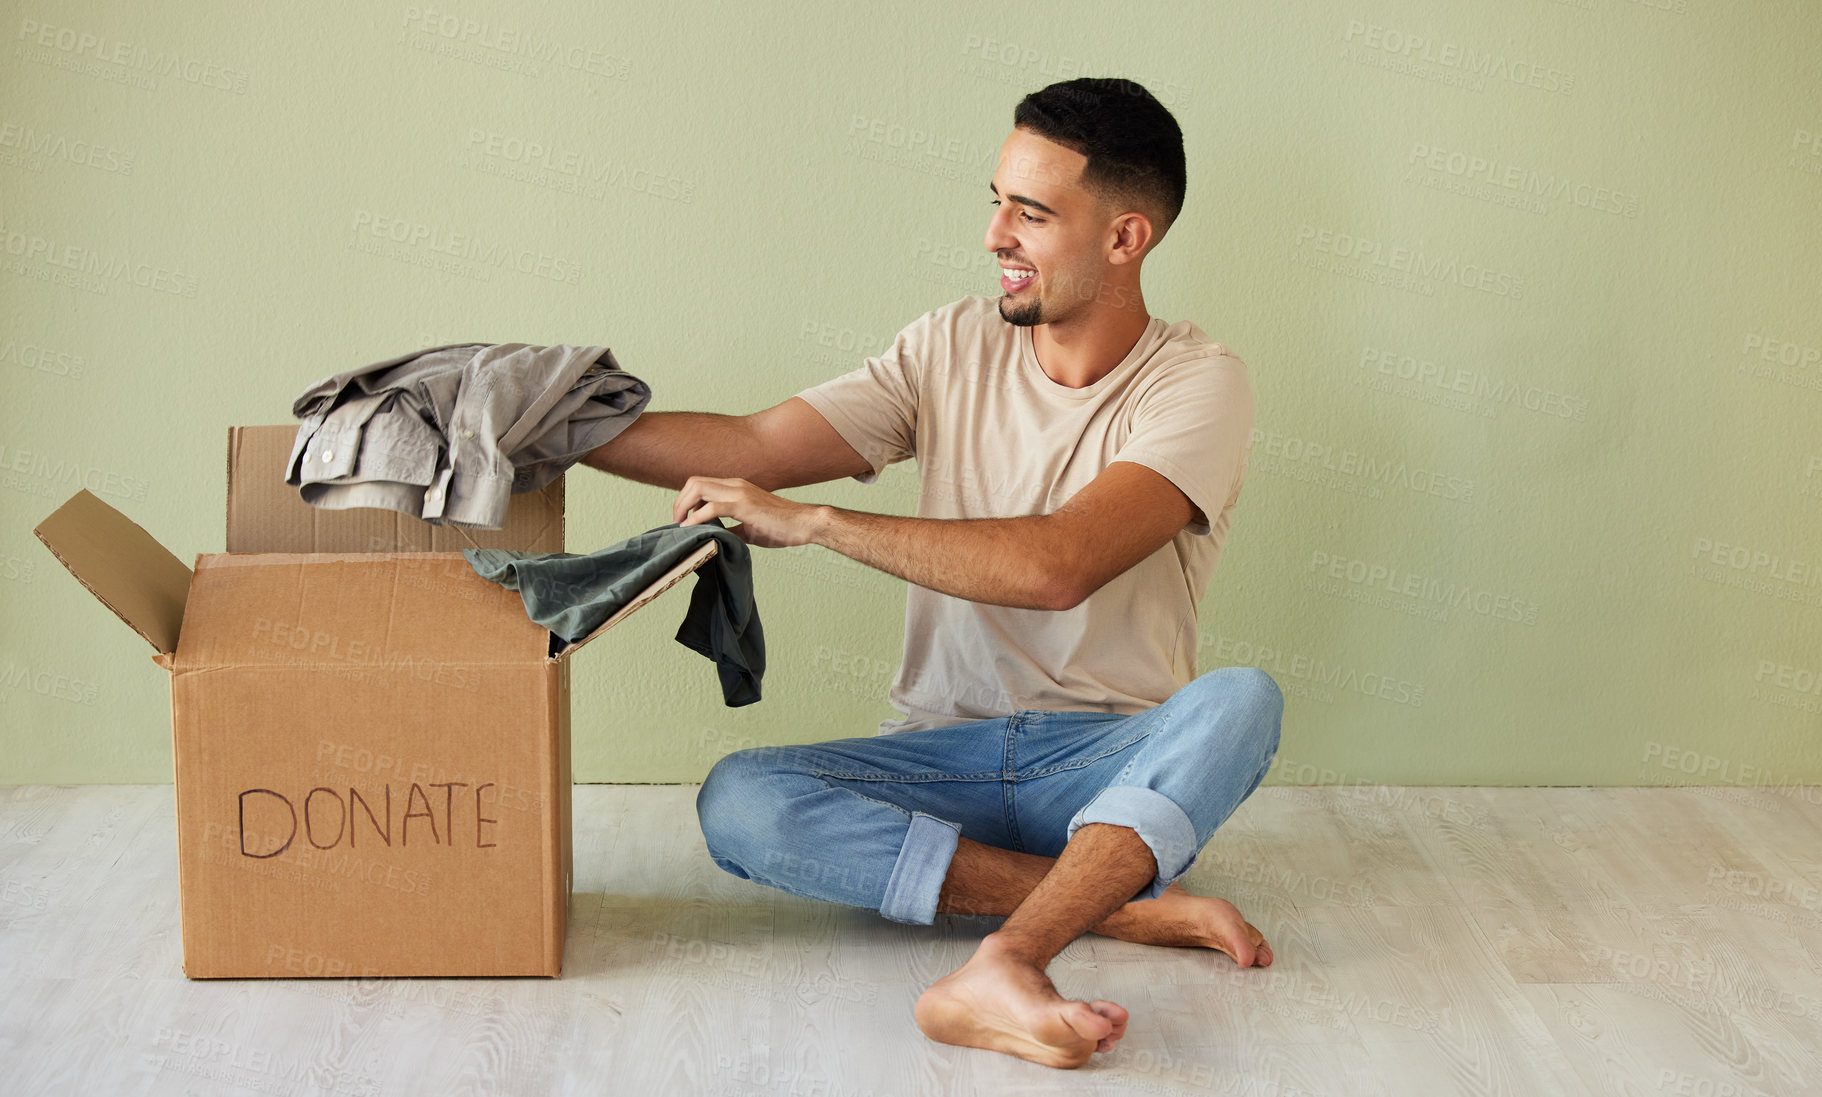 Buy stock photo Shot of a young man putting clothes into a donation box at home